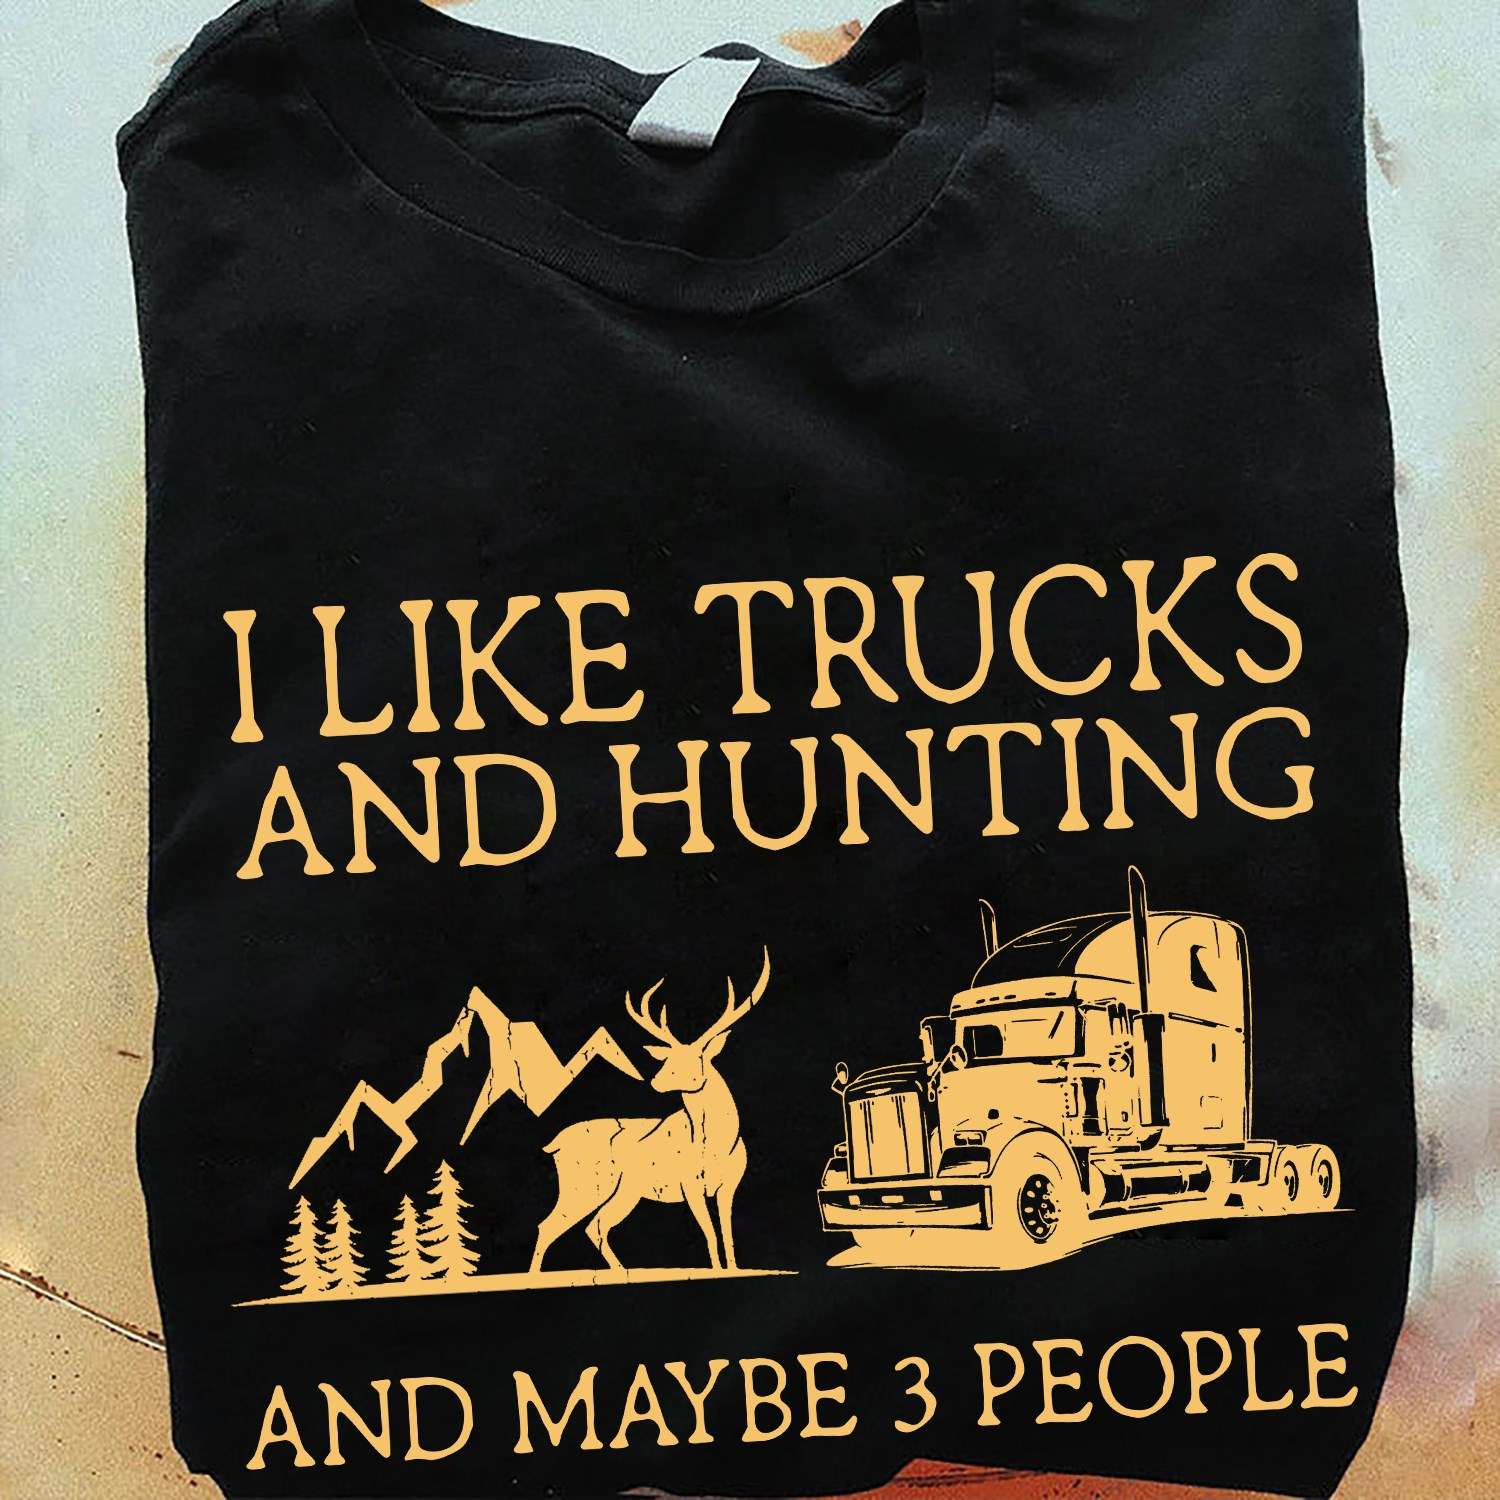 I like trucks and hunting and maybe 3 people - Truck driver and hunter